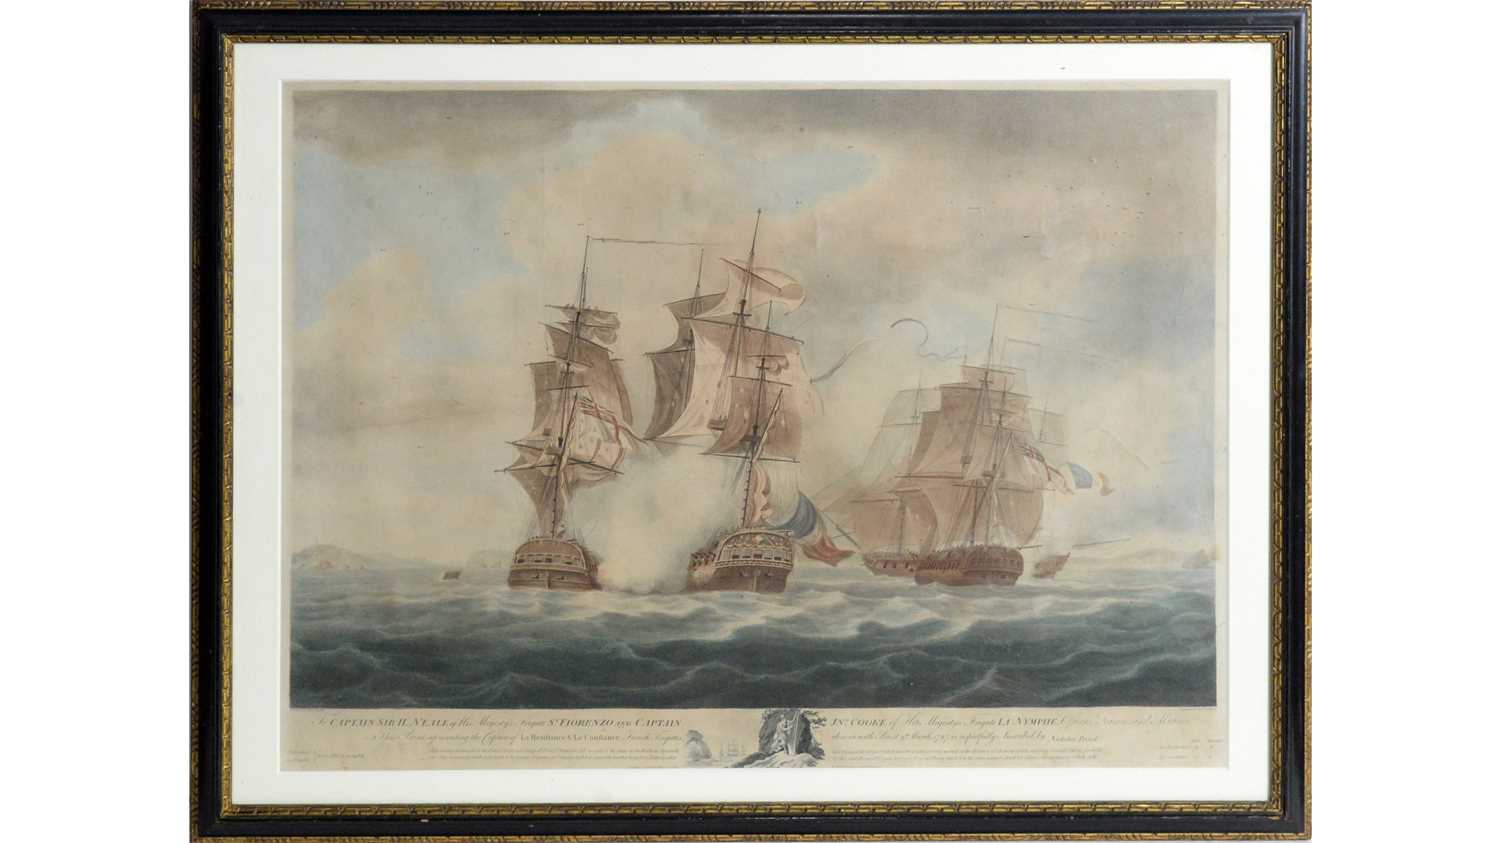 Lot 782 - After Nicholas Pocock - The Capture of the 'Resistance' and 'Constance' | engraving